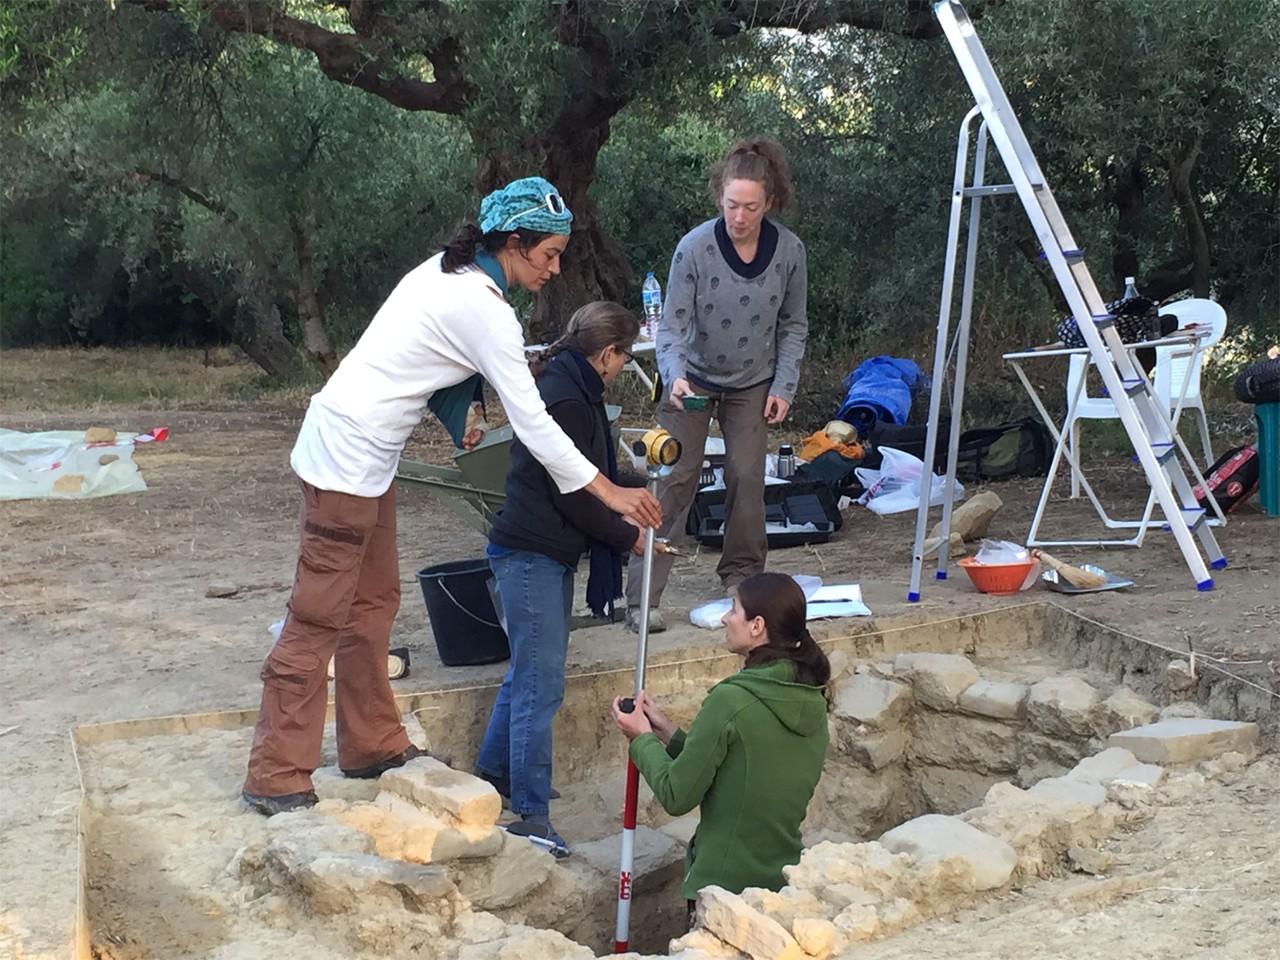 The UC-based team excavates the tomb of a Greek warrior discovered in southwest Greece.